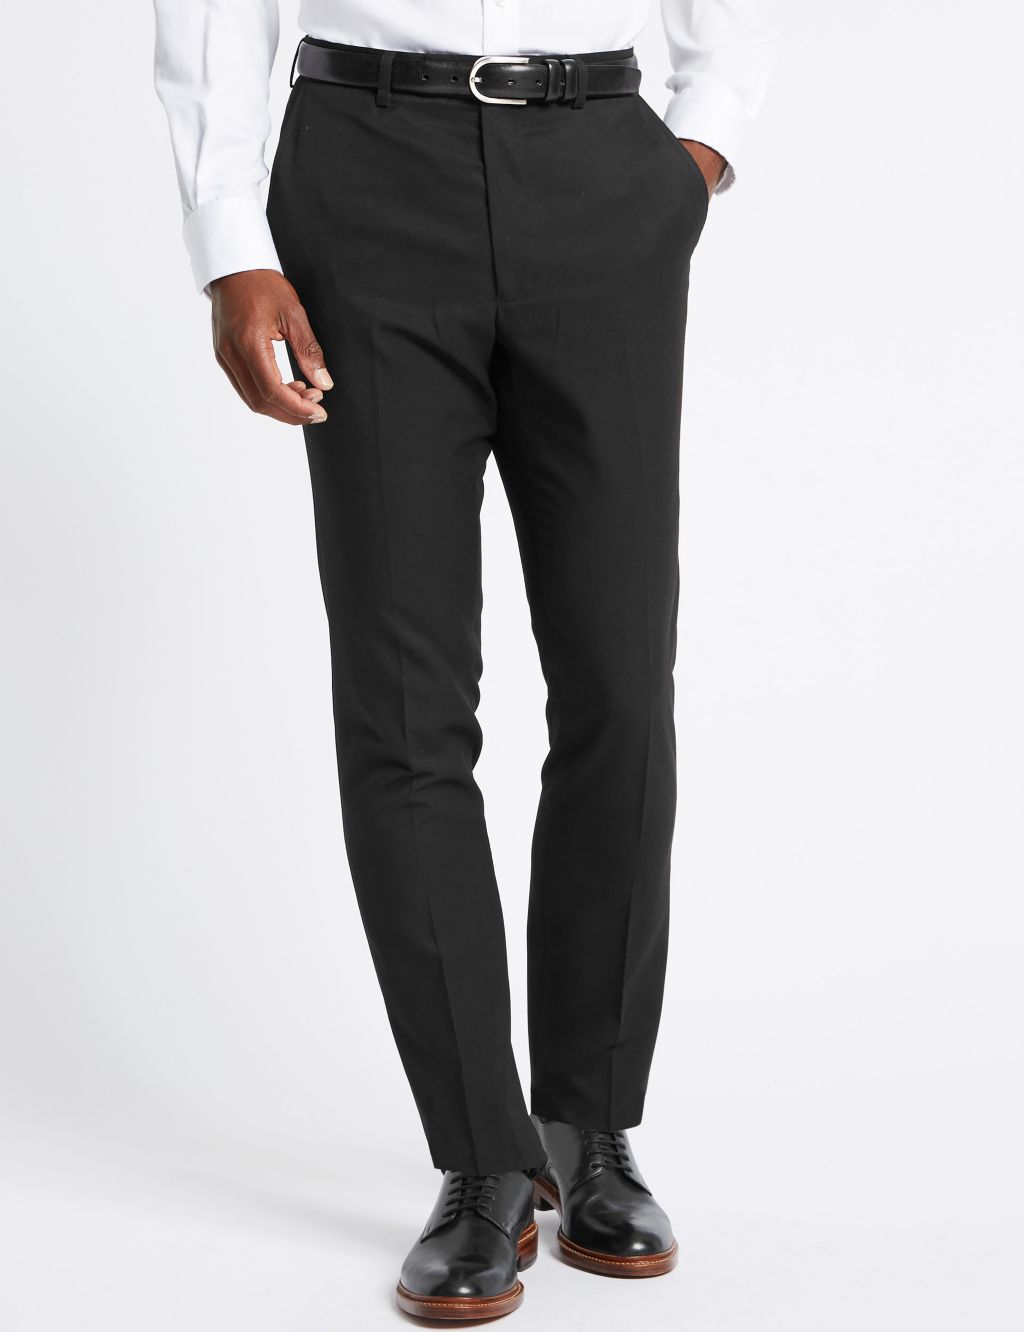 Black Skinny Fit Trousers | M&S Collection | M&S